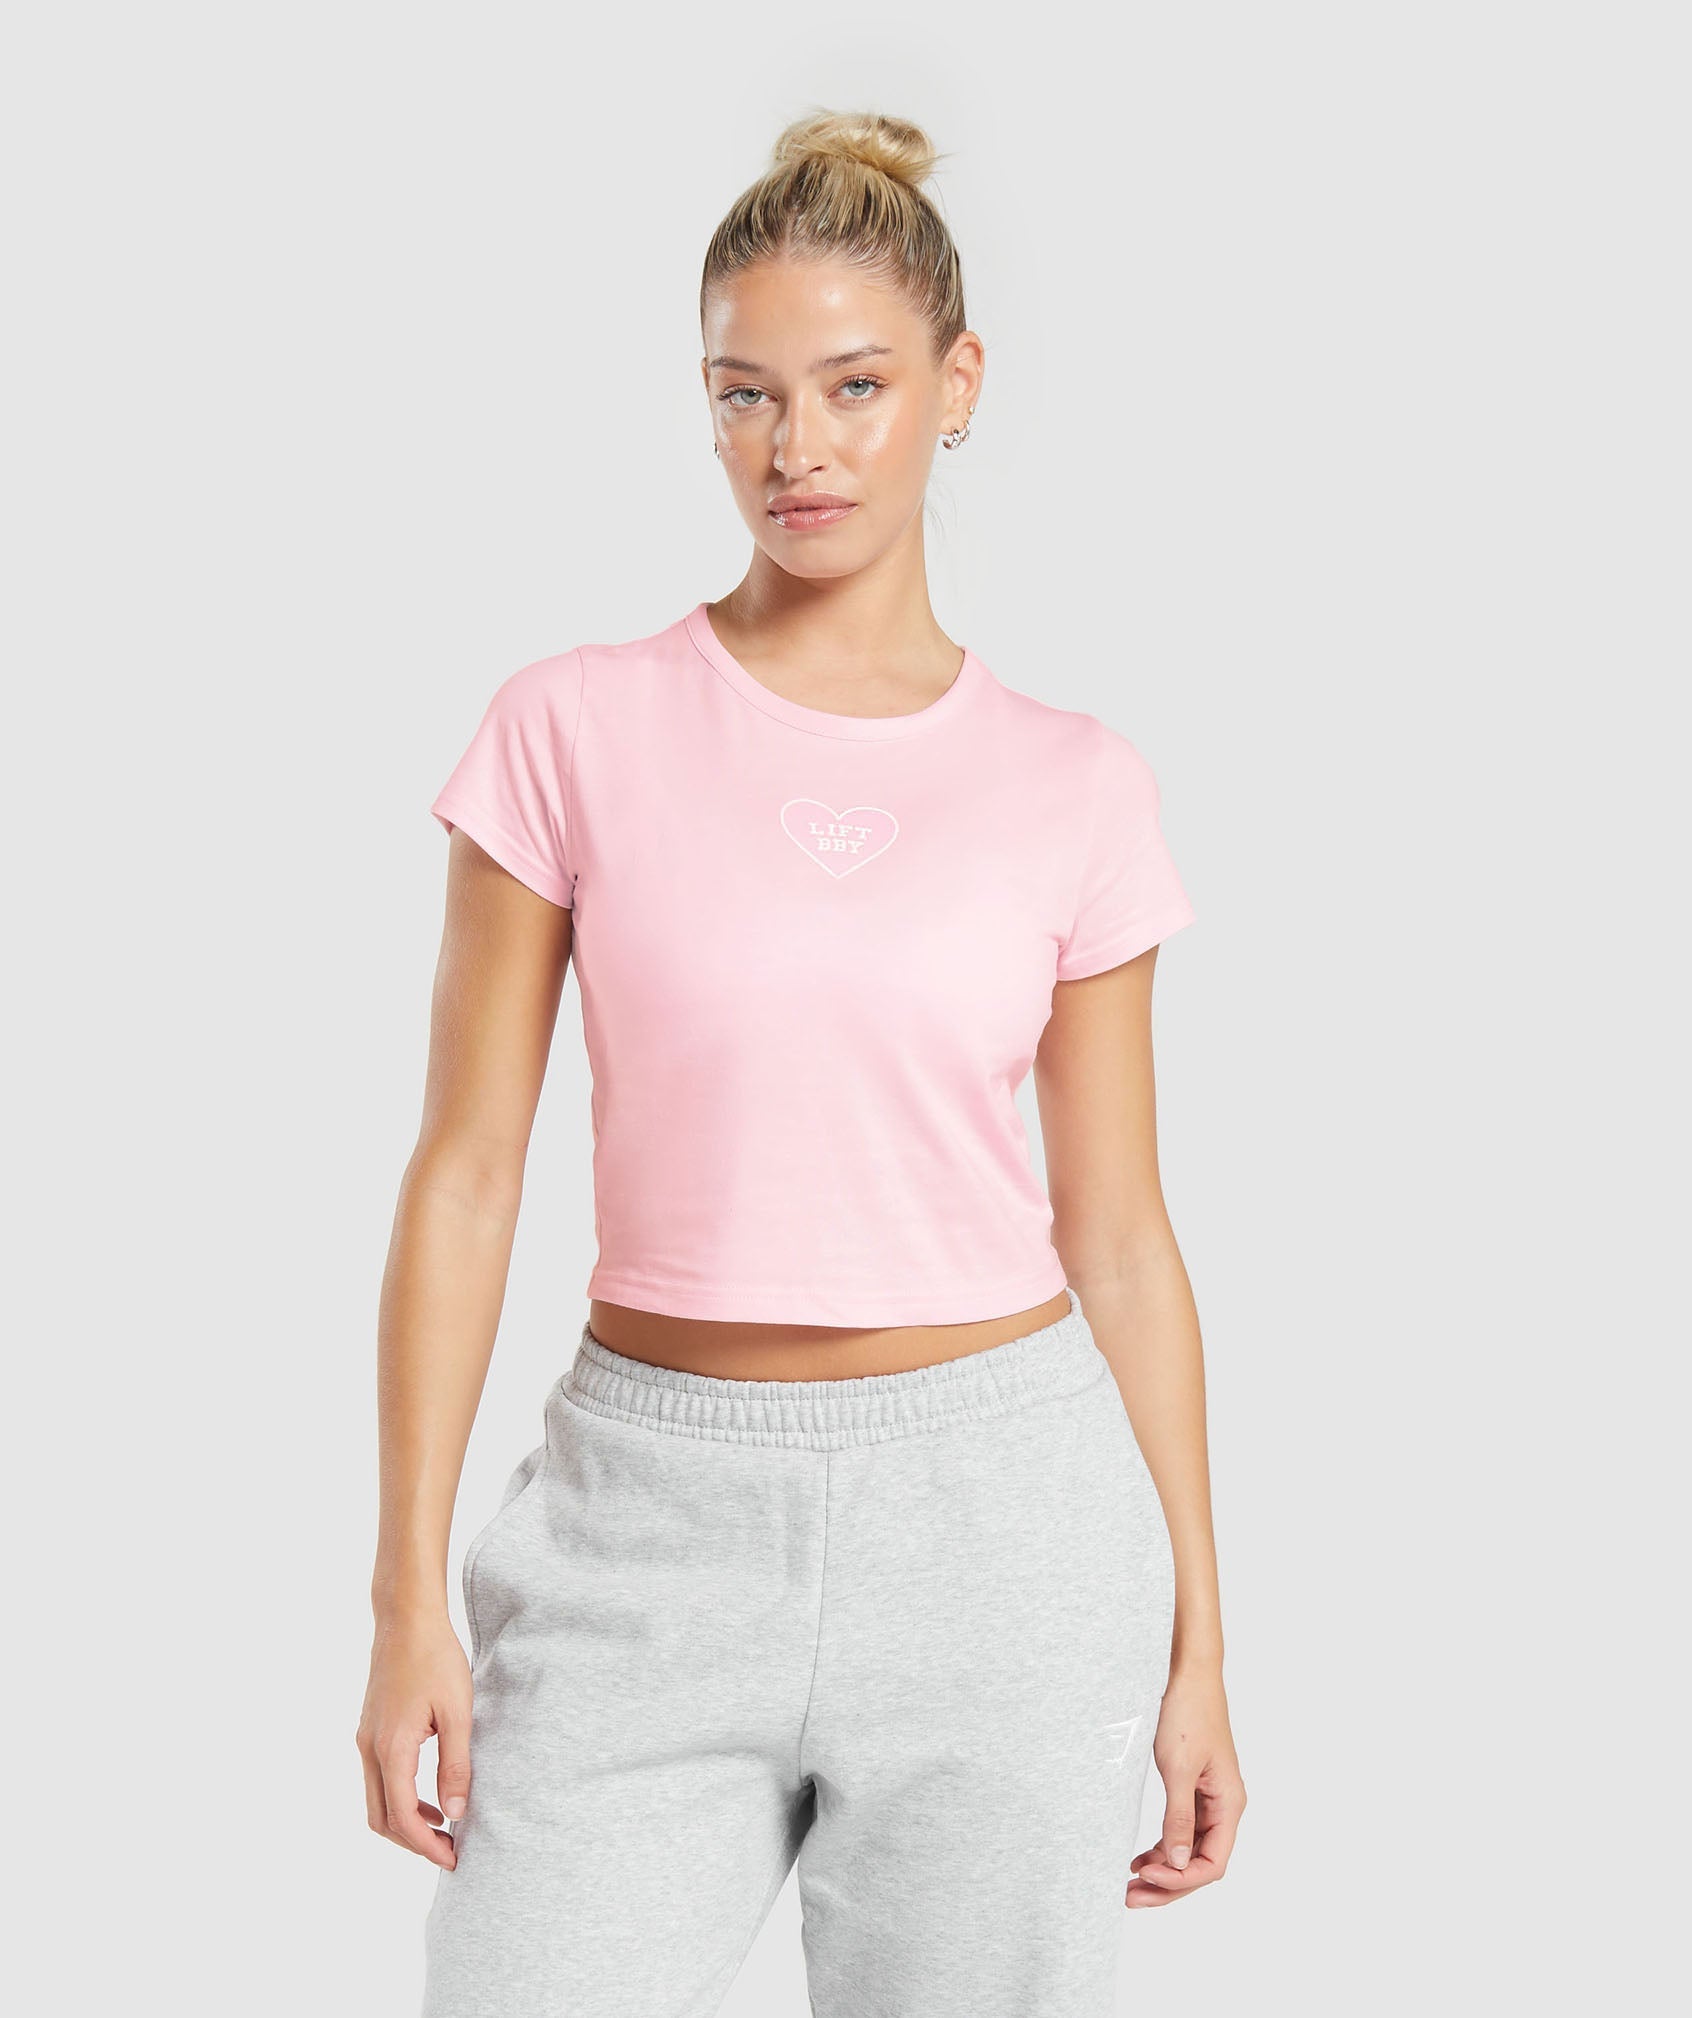 Love Hearts Crop Top in Dolly Pink - view 1